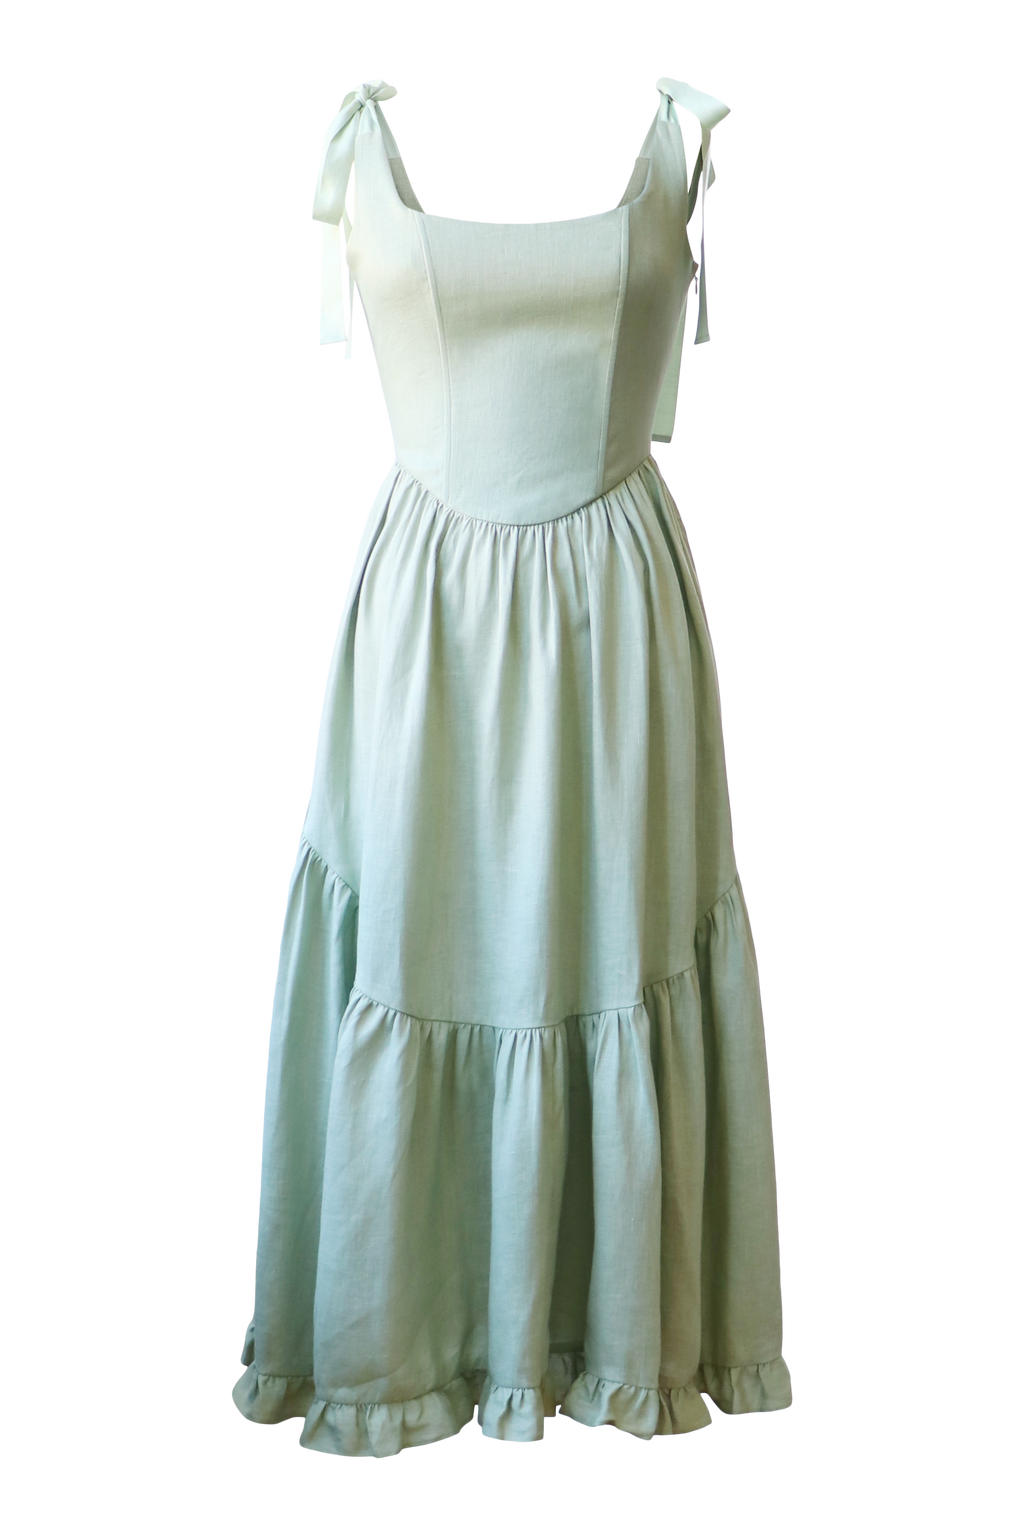 Mirabelle Dress in Sage Linen – Of Her Own Kind